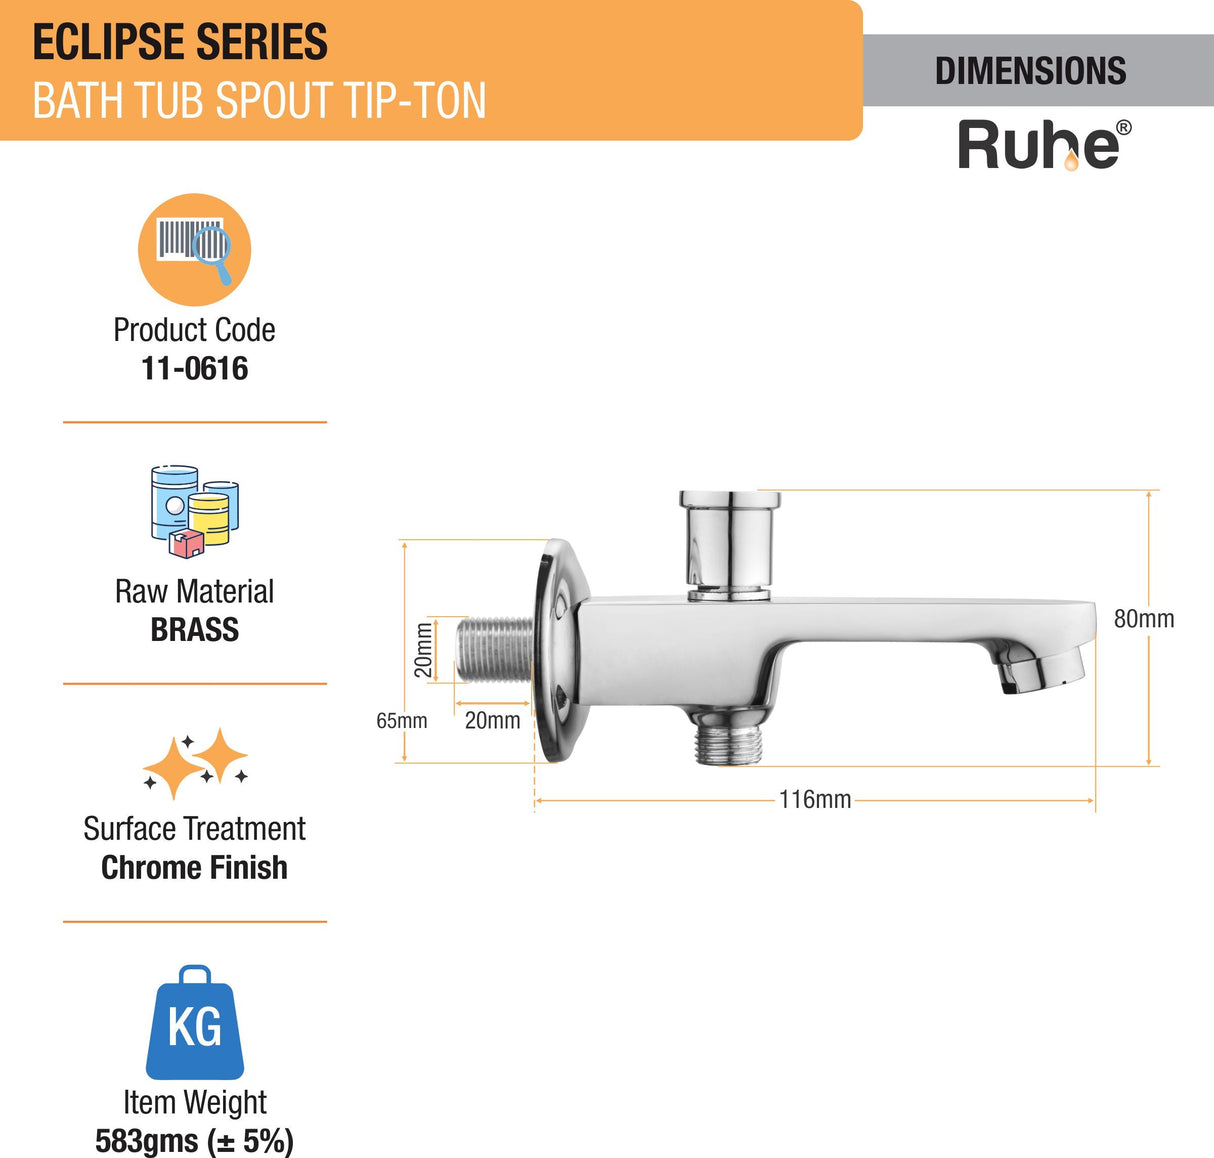 Eclipse BathTub Spout with Tip-Ton Brass Faucet dimensions and size